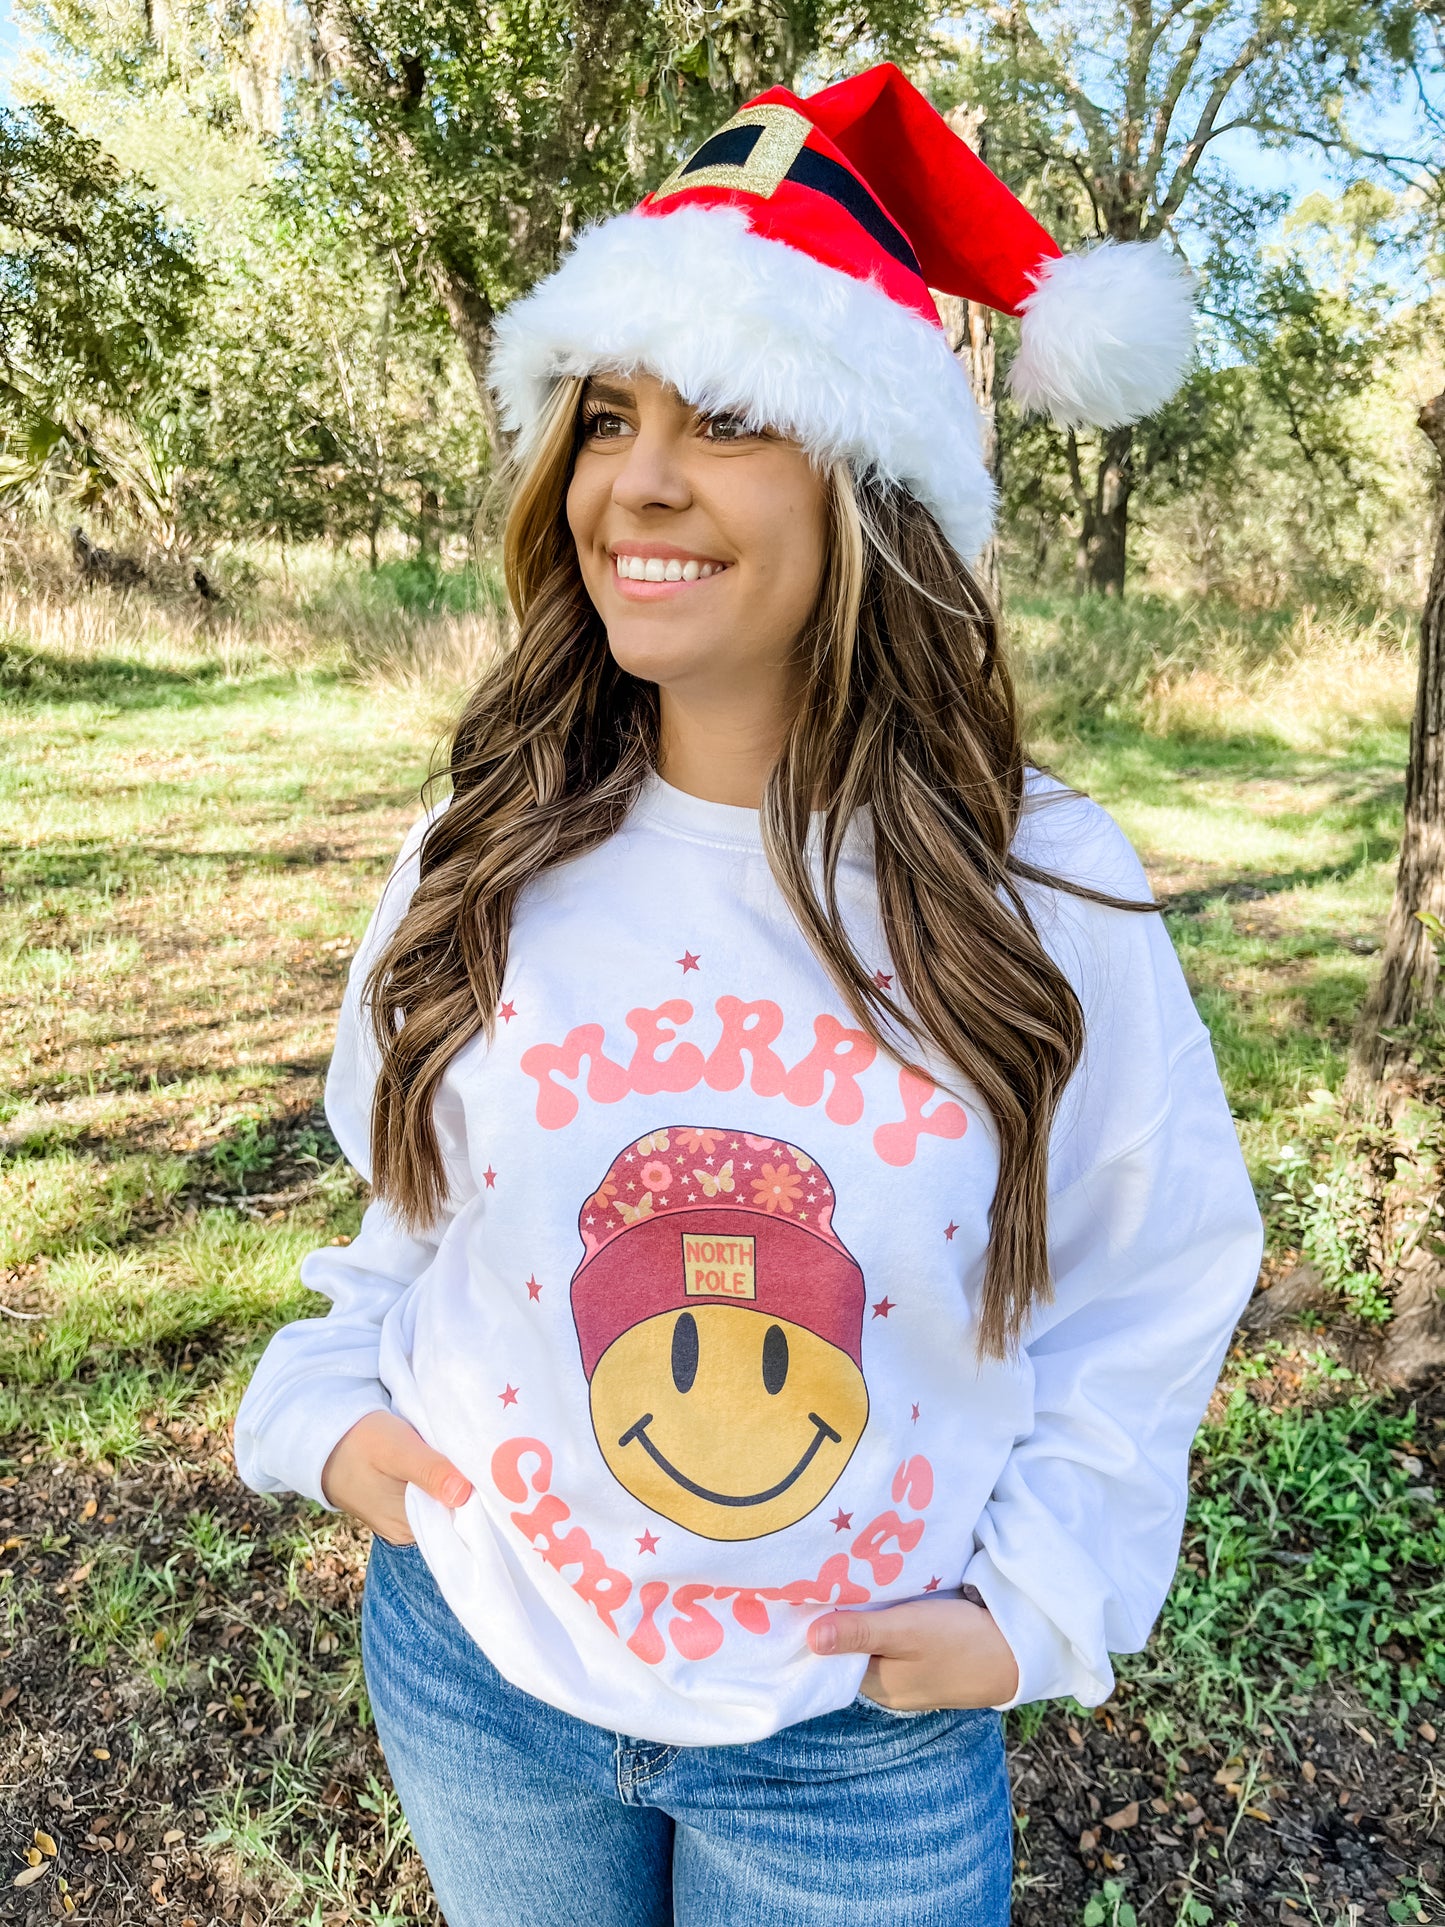 Merry Christmas Smiley Face Sweatshirt in White